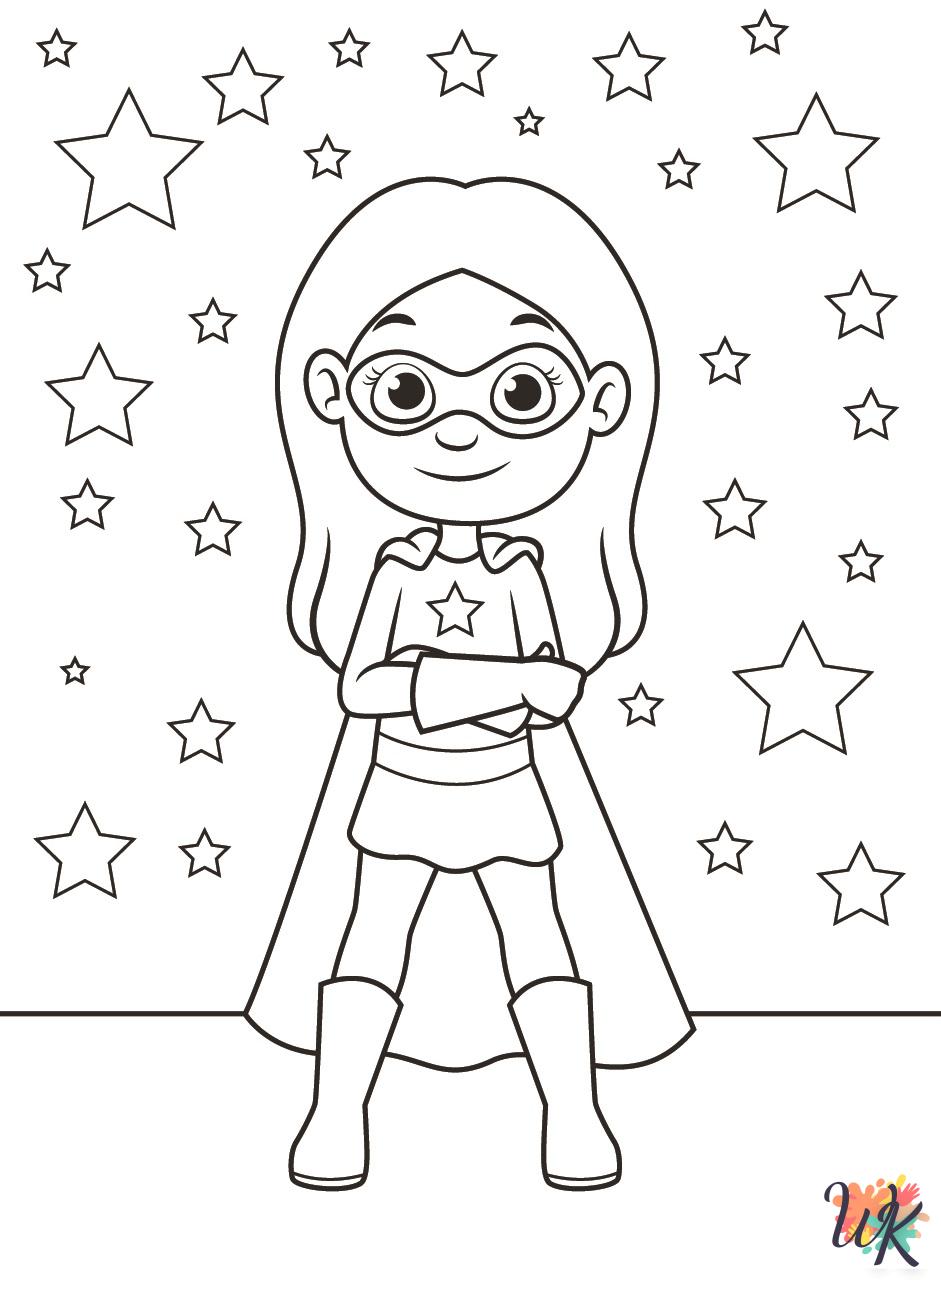 kids Superhero coloring pages